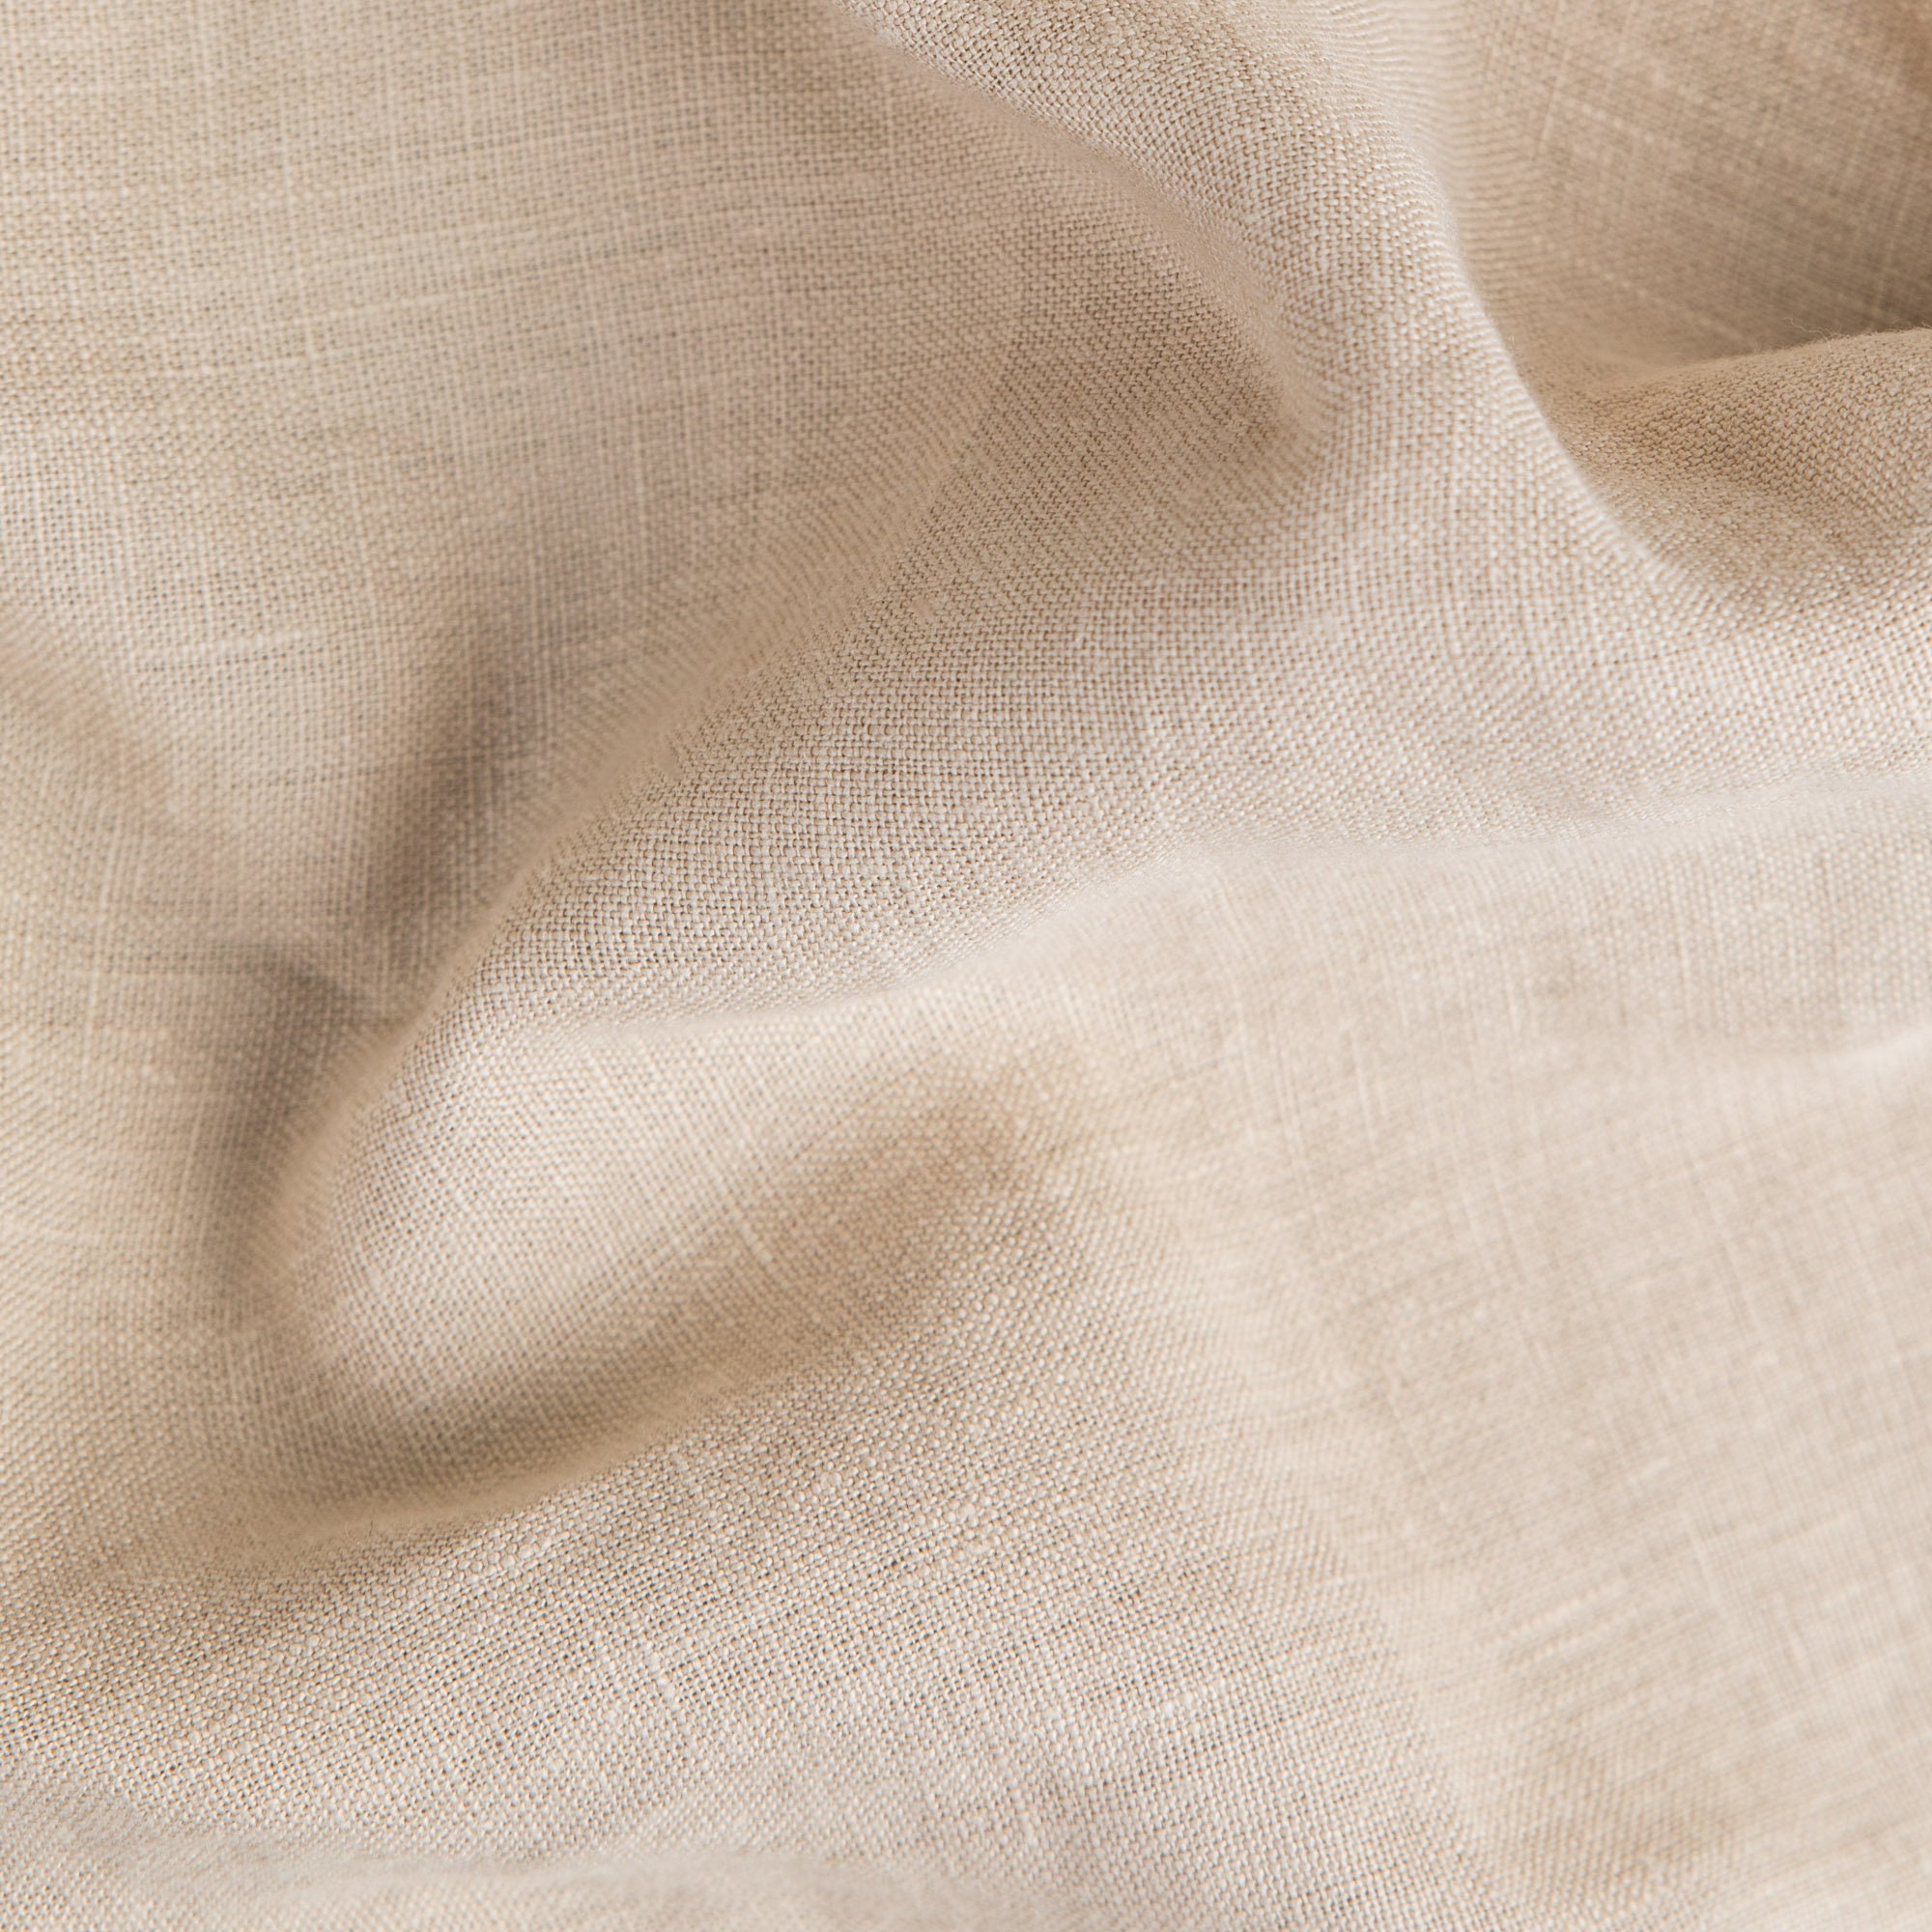 Ruffled Linen Pillow Case in Various Colors. Stone Washed - Etsy Australia